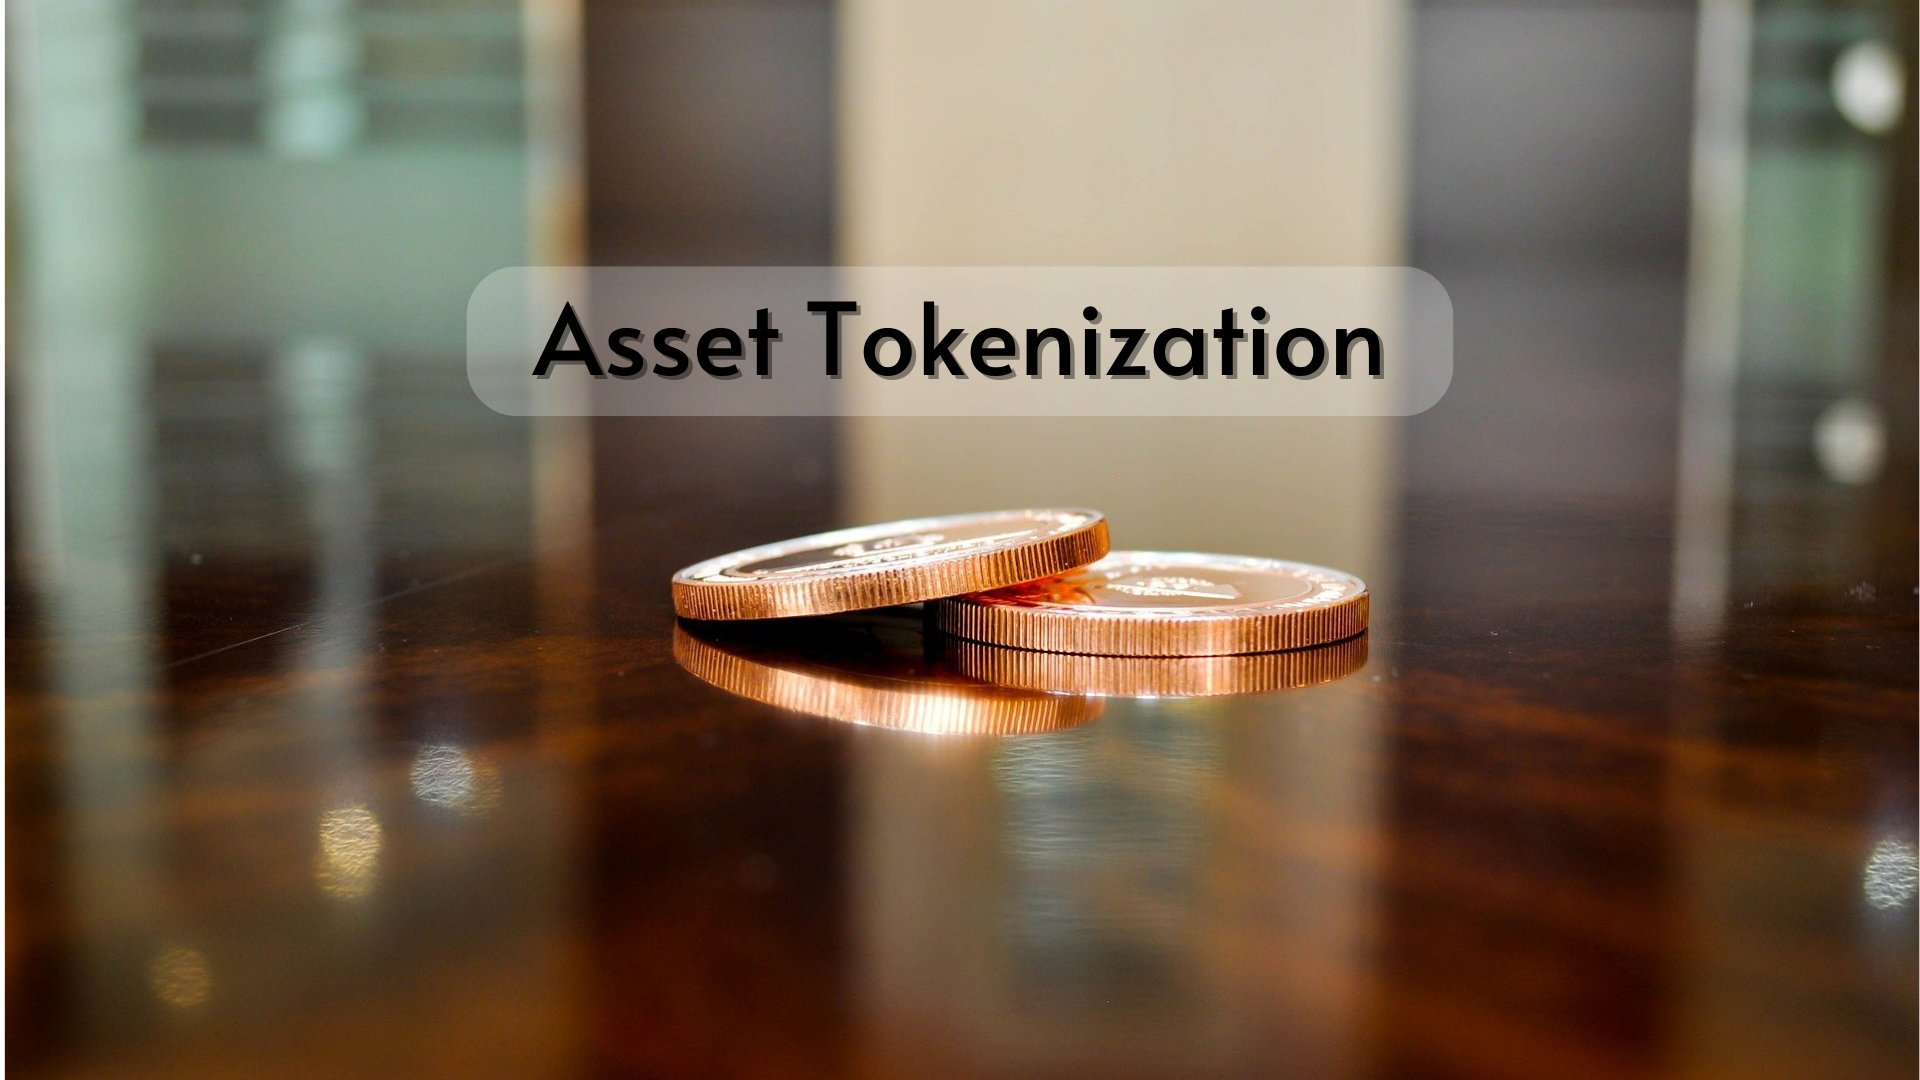 Asset Tokenization - Things you need to know about tokenizing your assets